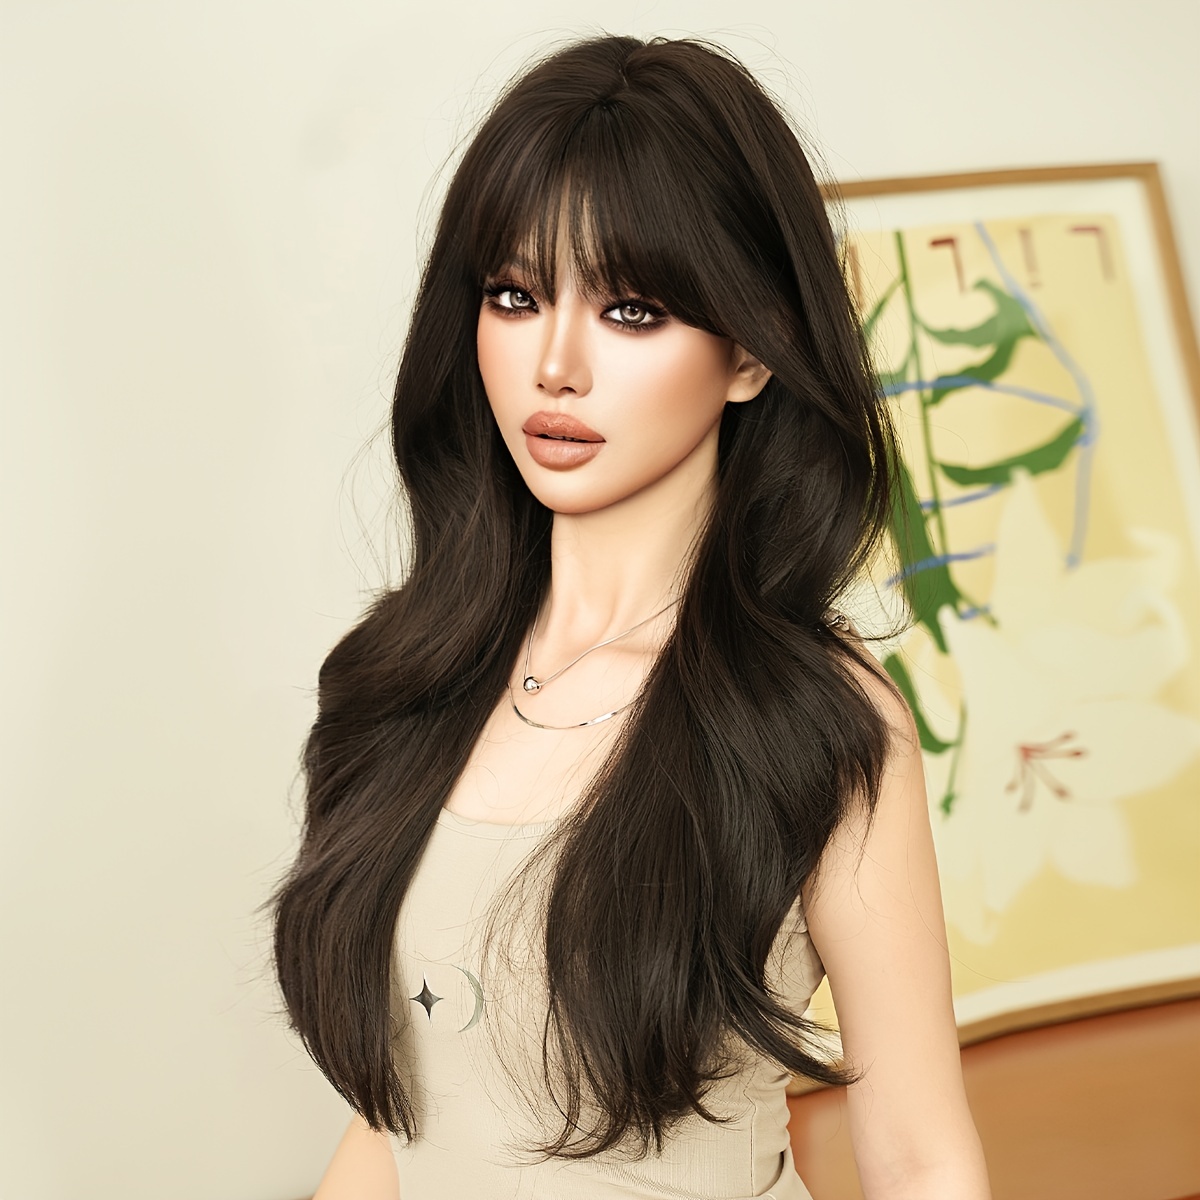 

Synthetic Long Body Wavy Dark Brown Wig With Bangs Natural Looking Fashion Loose Curly Hair Wigs High Density Tea Wig Beginner Friendly